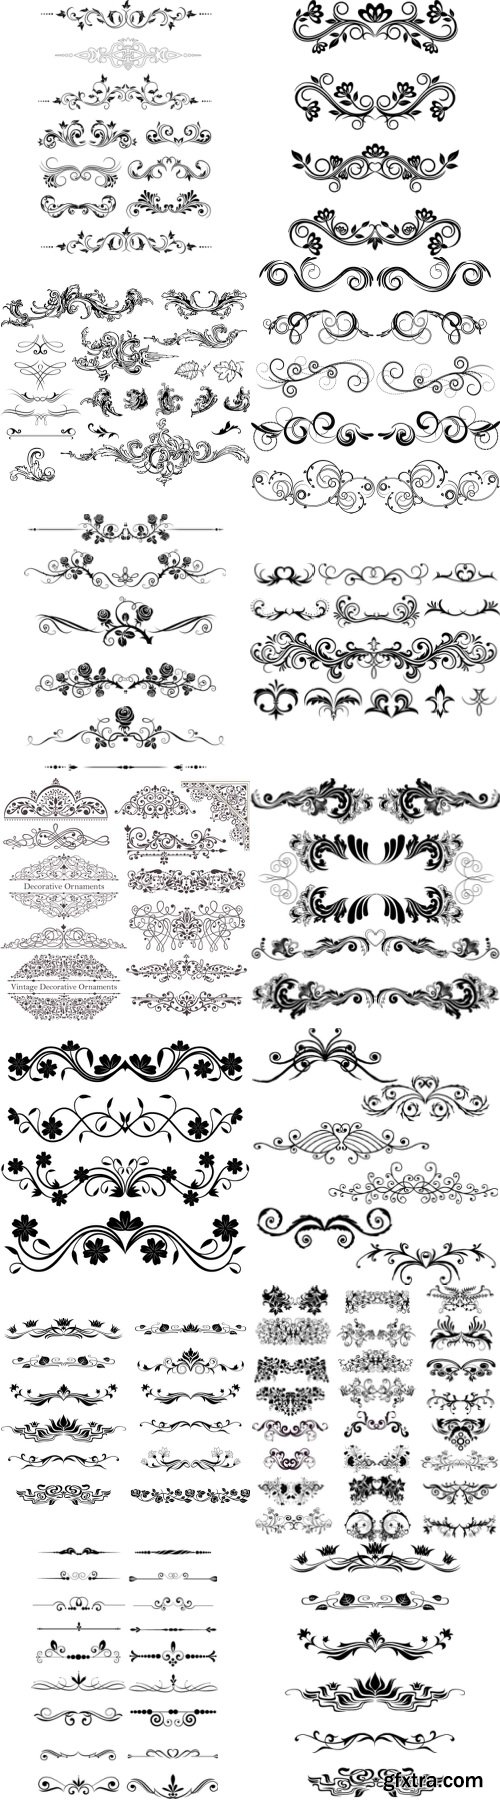 Vectors - Ornamental Floral Dividers [ALL 39 SETS IN 1!] 139xEPS